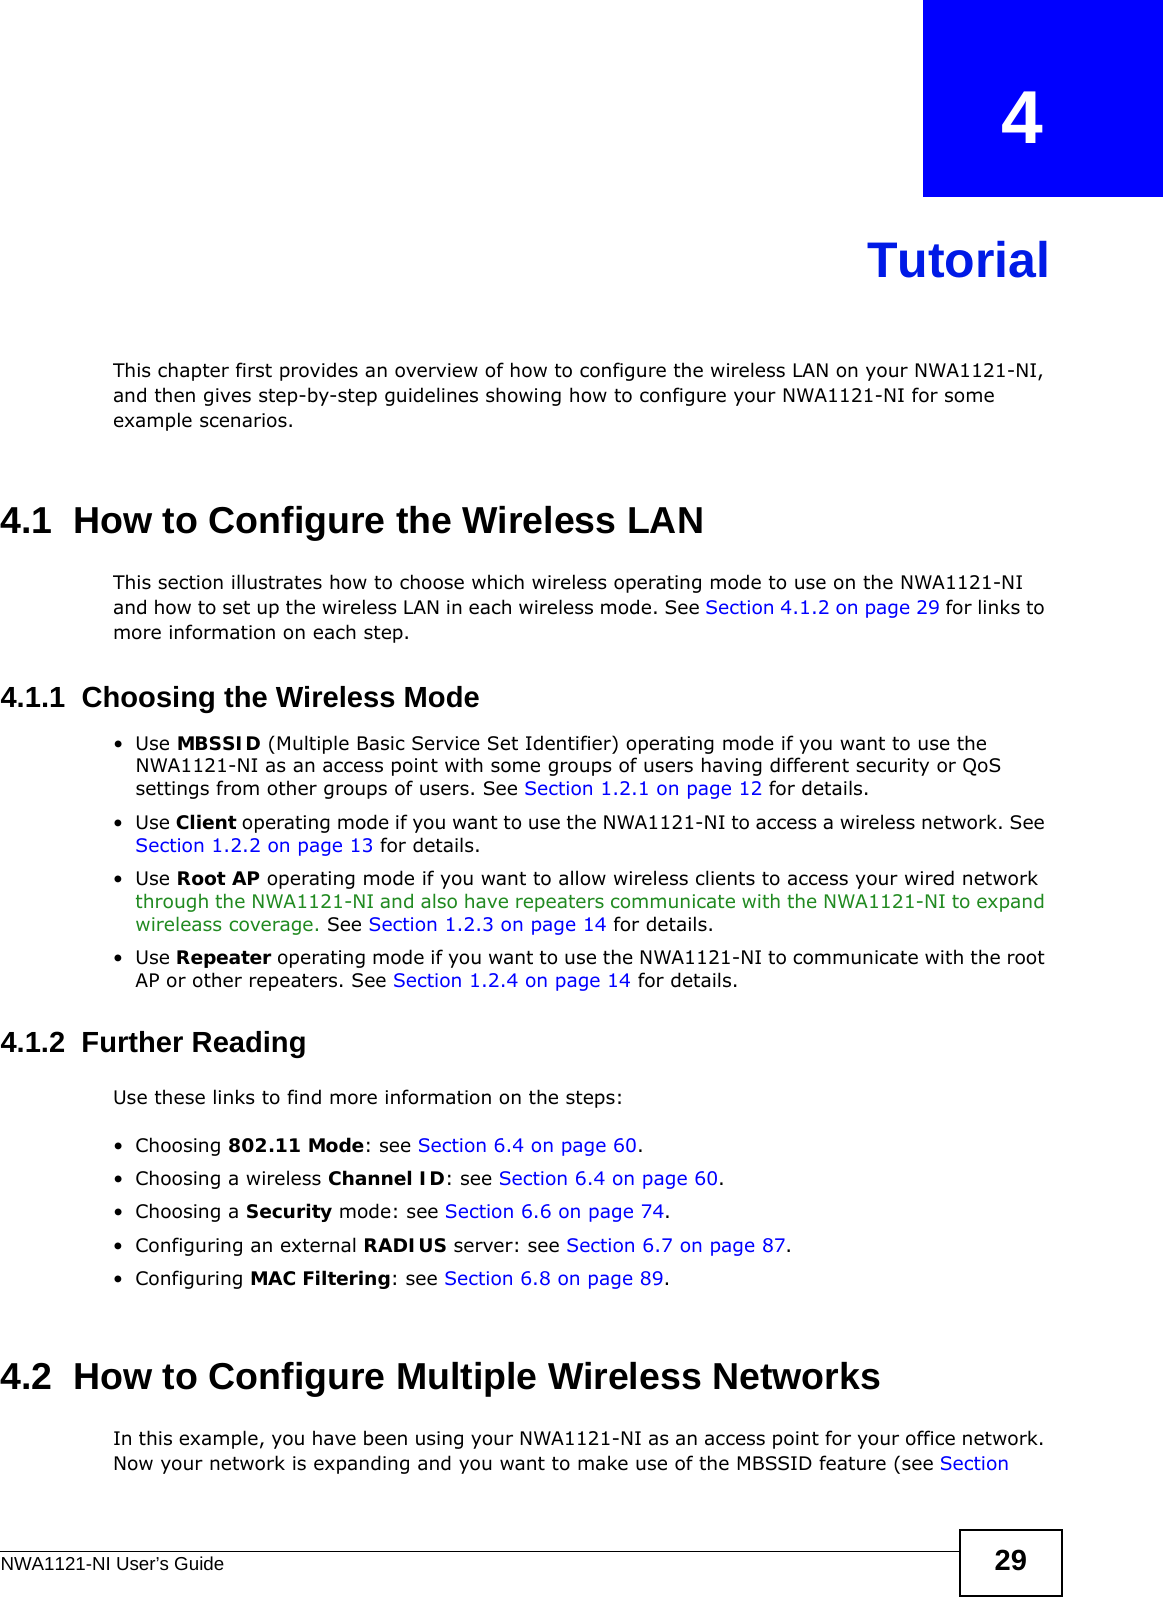 NWA1121-NI User’s Guide 29CHAPTER   4TutorialThis chapter first provides an overview of how to configure the wireless LAN on your NWA1121-NI, and then gives step-by-step guidelines showing how to configure your NWA1121-NI for some example scenarios. 4.1  How to Configure the Wireless LANThis section illustrates how to choose which wireless operating mode to use on the NWA1121-NI and how to set up the wireless LAN in each wireless mode. See Section 4.1.2 on page 29 for links to more information on each step.4.1.1  Choosing the Wireless Mode•Use MBSSID (Multiple Basic Service Set Identifier) operating mode if you want to use the NWA1121-NI as an access point with some groups of users having different security or QoS settings from other groups of users. See Section 1.2.1 on page 12 for details.•Use Client operating mode if you want to use the NWA1121-NI to access a wireless network. See Section 1.2.2 on page 13 for details.•Use Root AP operating mode if you want to allow wireless clients to access your wired network through the NWA1121-NI and also have repeaters communicate with the NWA1121-NI to expand wireleass coverage. See Section 1.2.3 on page 14 for details.•Use Repeater operating mode if you want to use the NWA1121-NI to communicate with the root AP or other repeaters. See Section 1.2.4 on page 14 for details.4.1.2  Further ReadingUse these links to find more information on the steps:• Choosing 802.11 Mode: see Section 6.4 on page 60.• Choosing a wireless Channel ID: see Section 6.4 on page 60.• Choosing a Security mode: see Section 6.6 on page 74.• Configuring an external RADIUS server: see Section 6.7 on page 87.•Configuring MAC Filtering: see Section 6.8 on page 89.4.2  How to Configure Multiple Wireless NetworksIn this example, you have been using your NWA1121-NI as an access point for your office network. Now your network is expanding and you want to make use of the MBSSID feature (see Section 